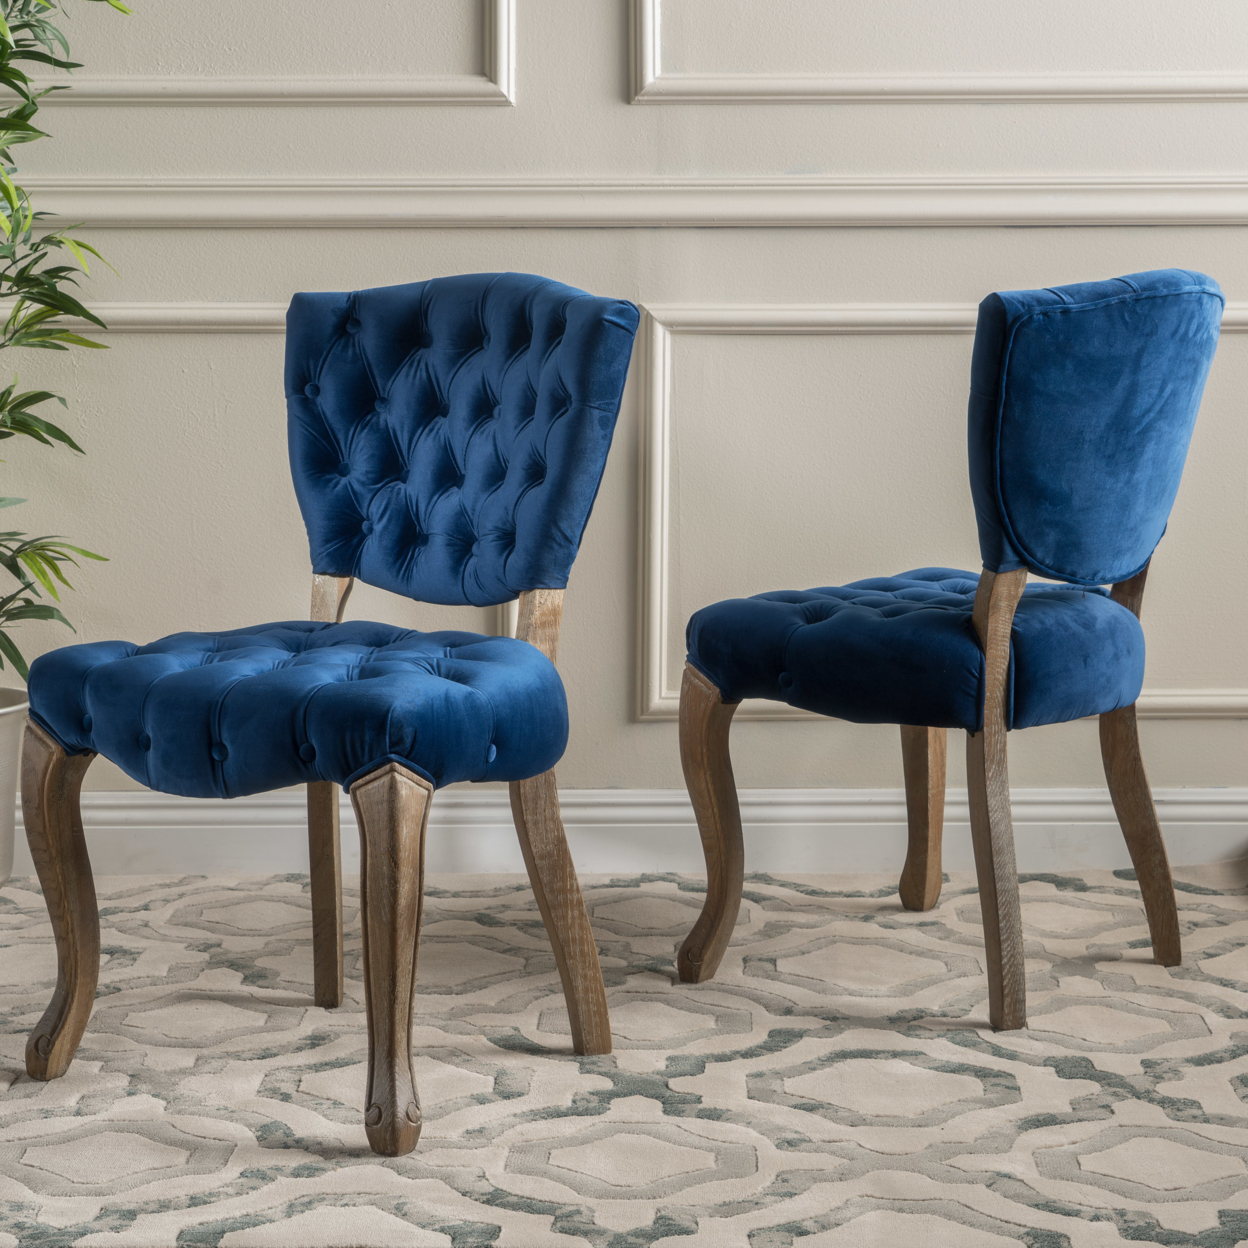 Bates Tufted Velvet Dining Chair With Cabriole Legs (Set Of 2) - Navy Blue Fabric